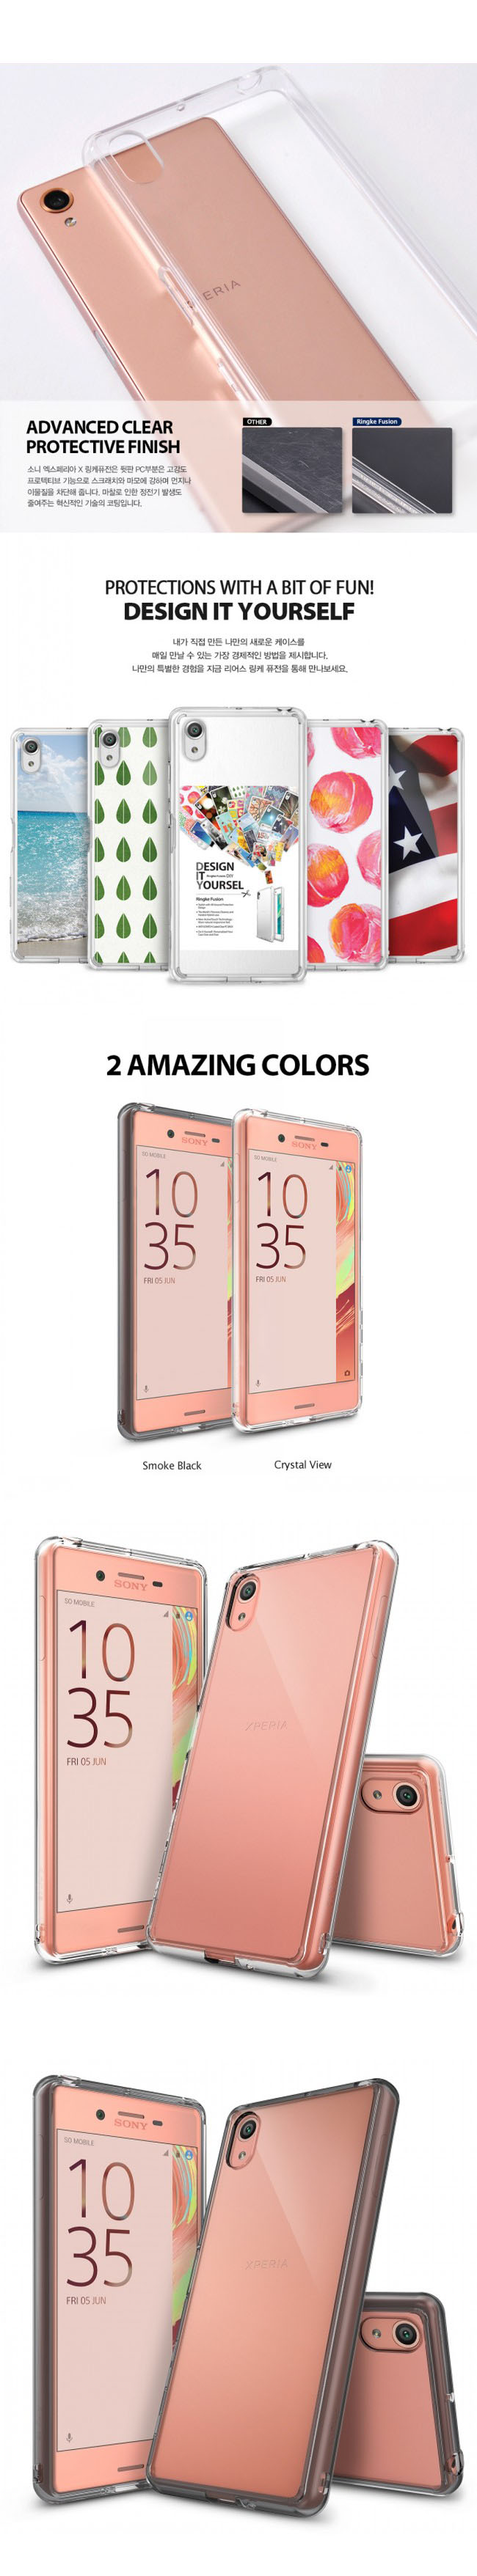 Ốp lưng Sony Xperia X Ringke Fusion trong suốt 333